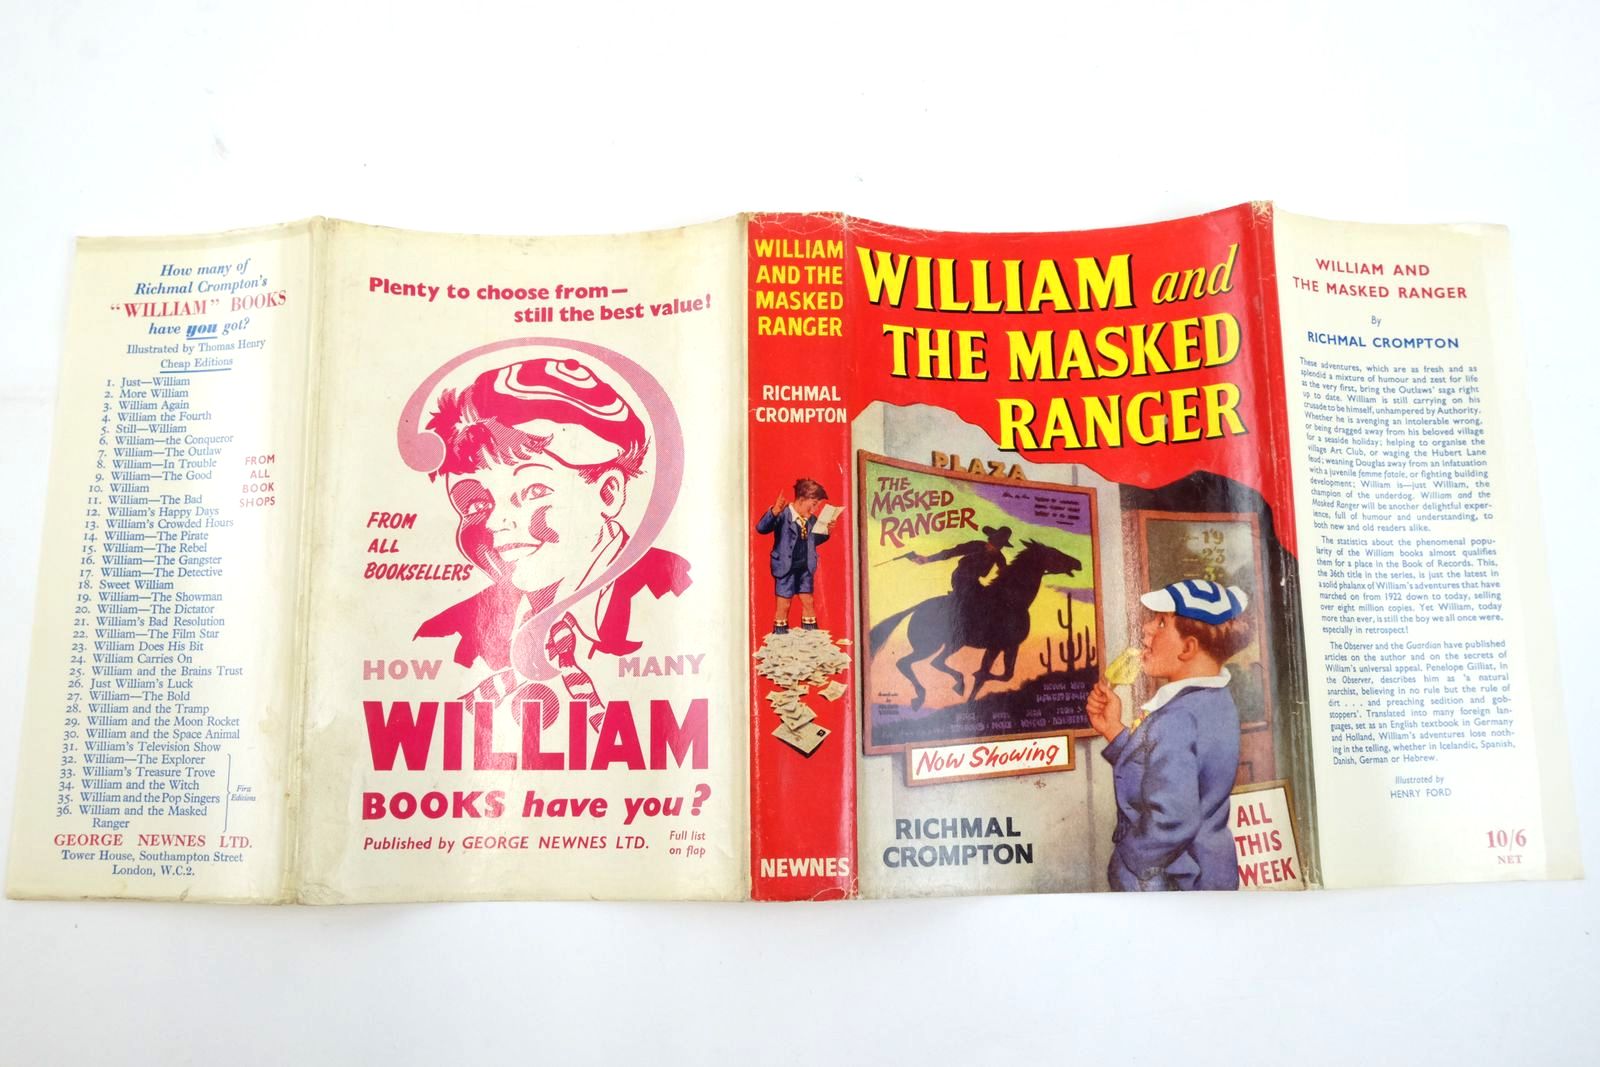 Photo of WILLIAM AND THE MASKED RANGER written by Crompton, Richmal illustrated by Ford, Henry published by George Newnes Ltd. (STOCK CODE: 2136195)  for sale by Stella & Rose's Books